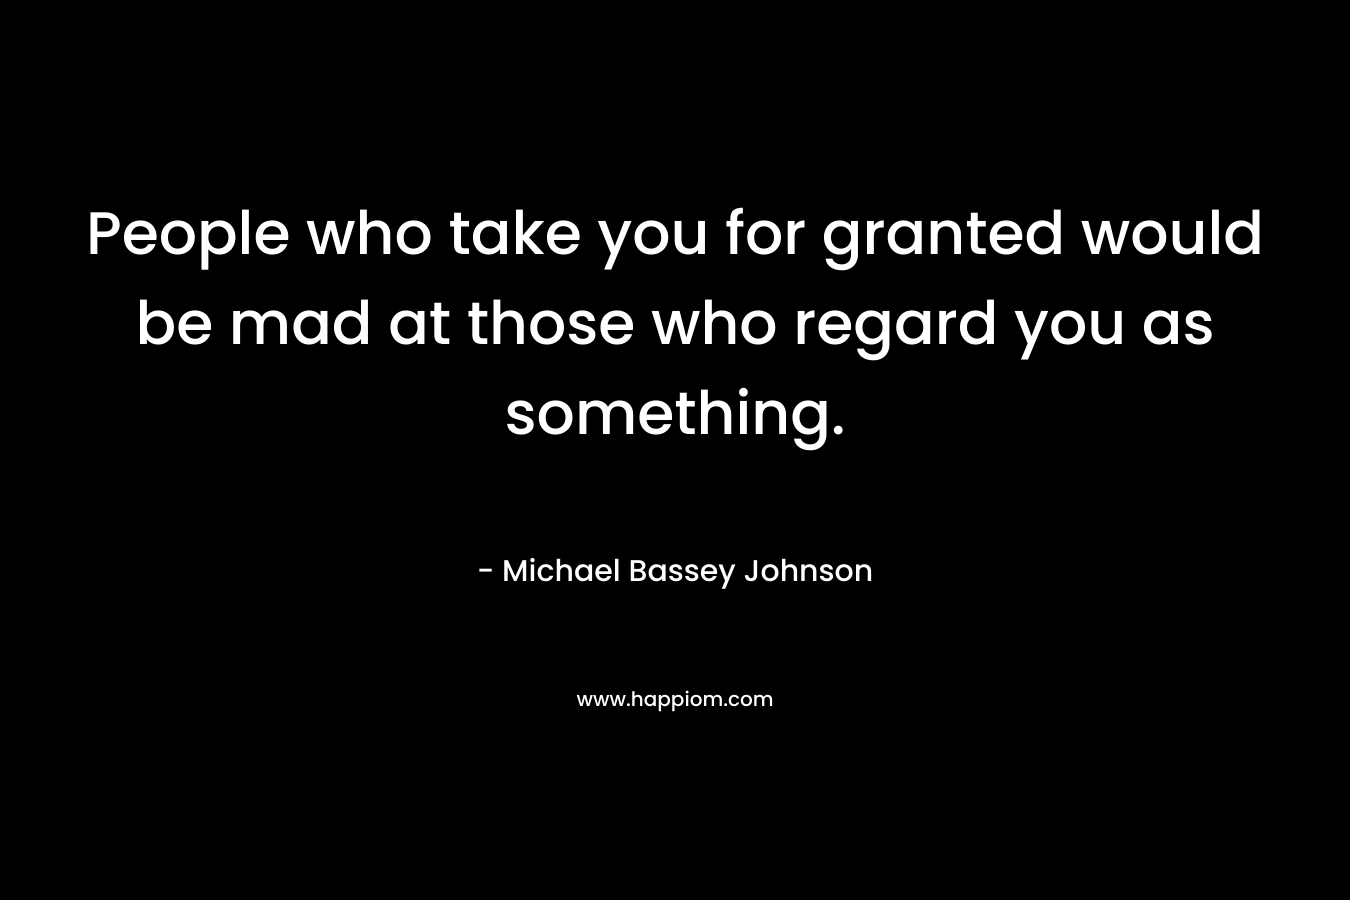 People who take you for granted would be mad at those who regard you as something.